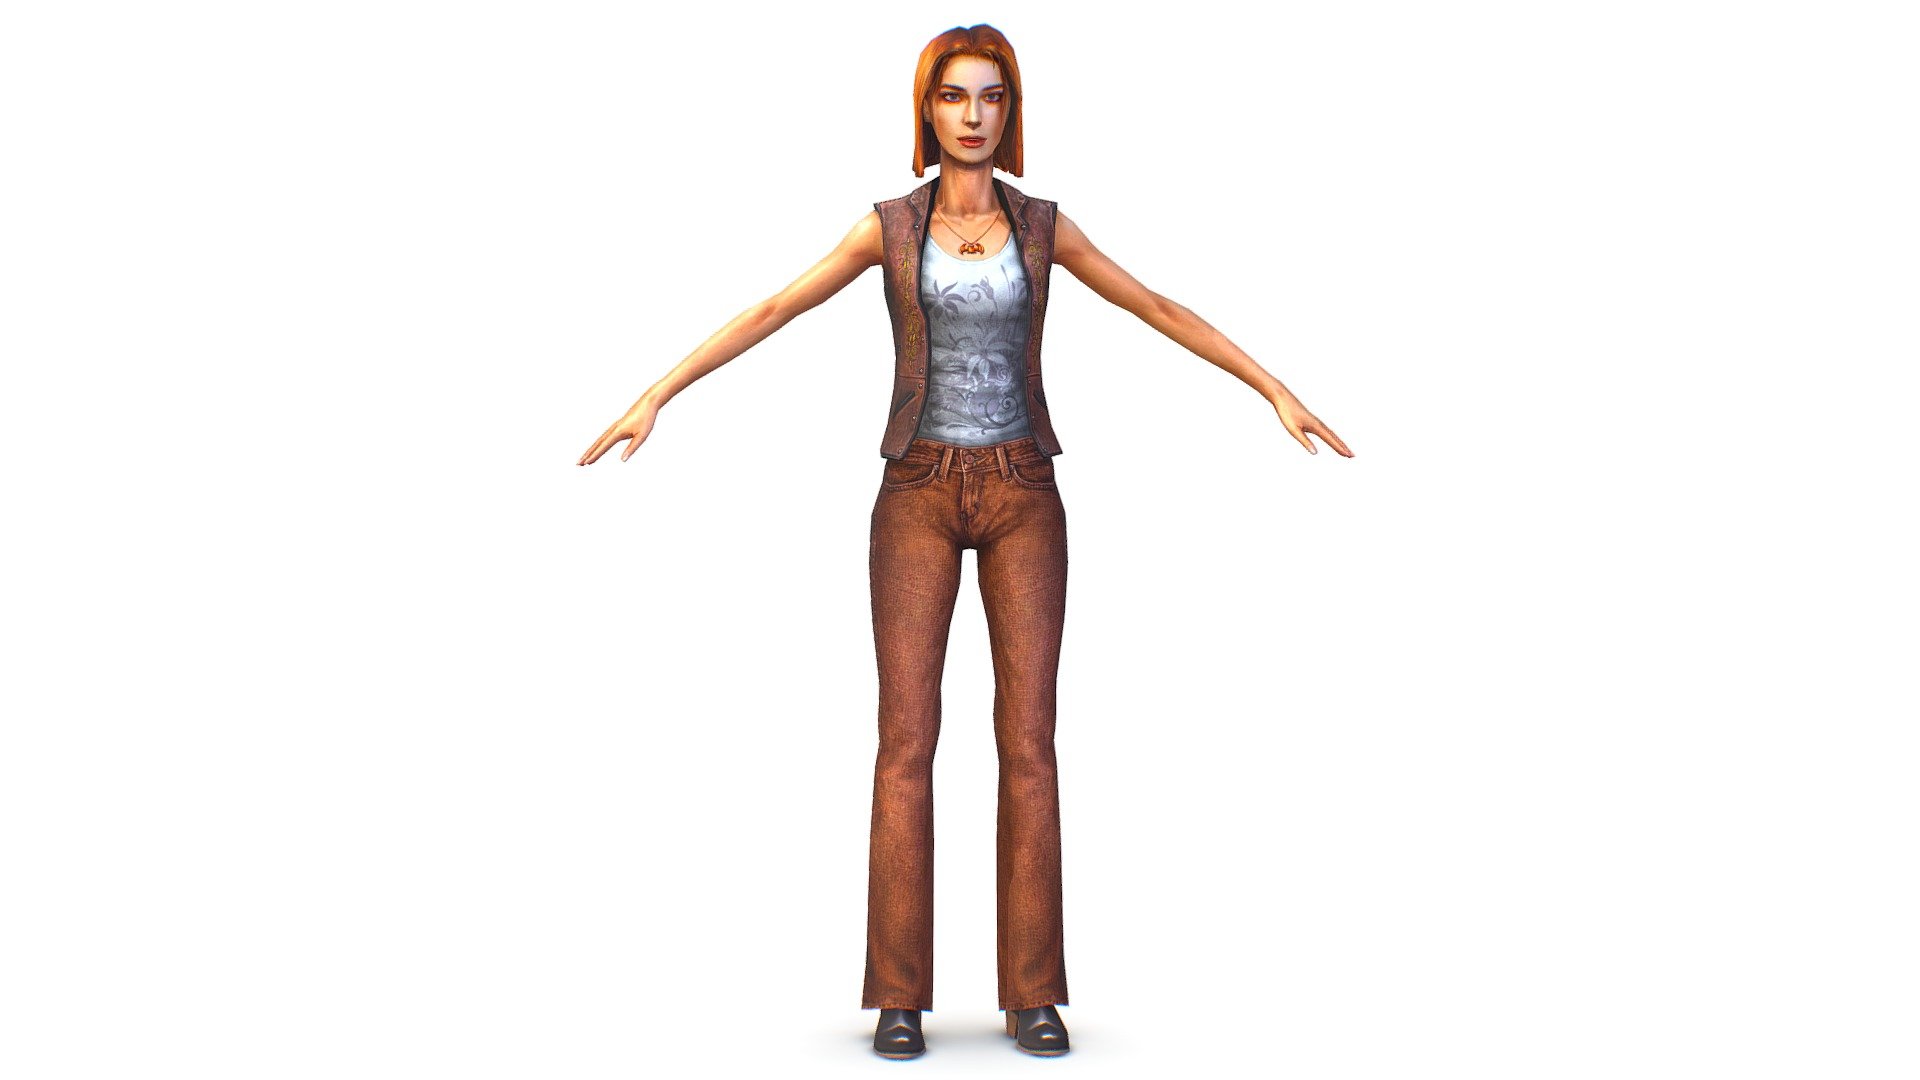 A young girl in In jeans and a vest - 3dsMax file included/ texture 1024 color only 3d model